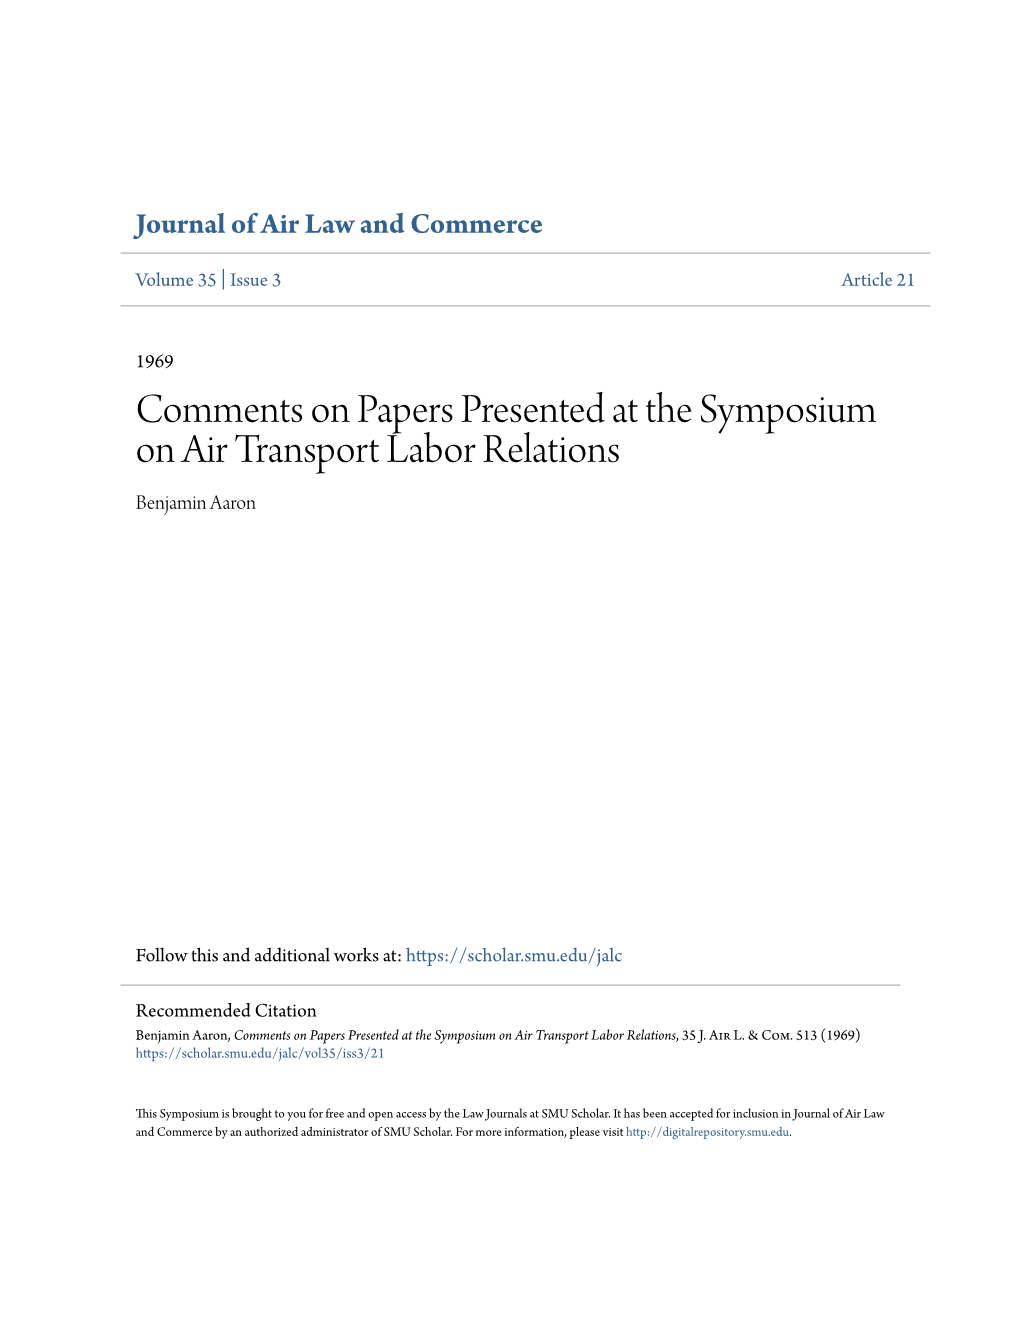 Comments on Papers Presented at the Symposium on Air Transport Labor Relations Benjamin Aaron